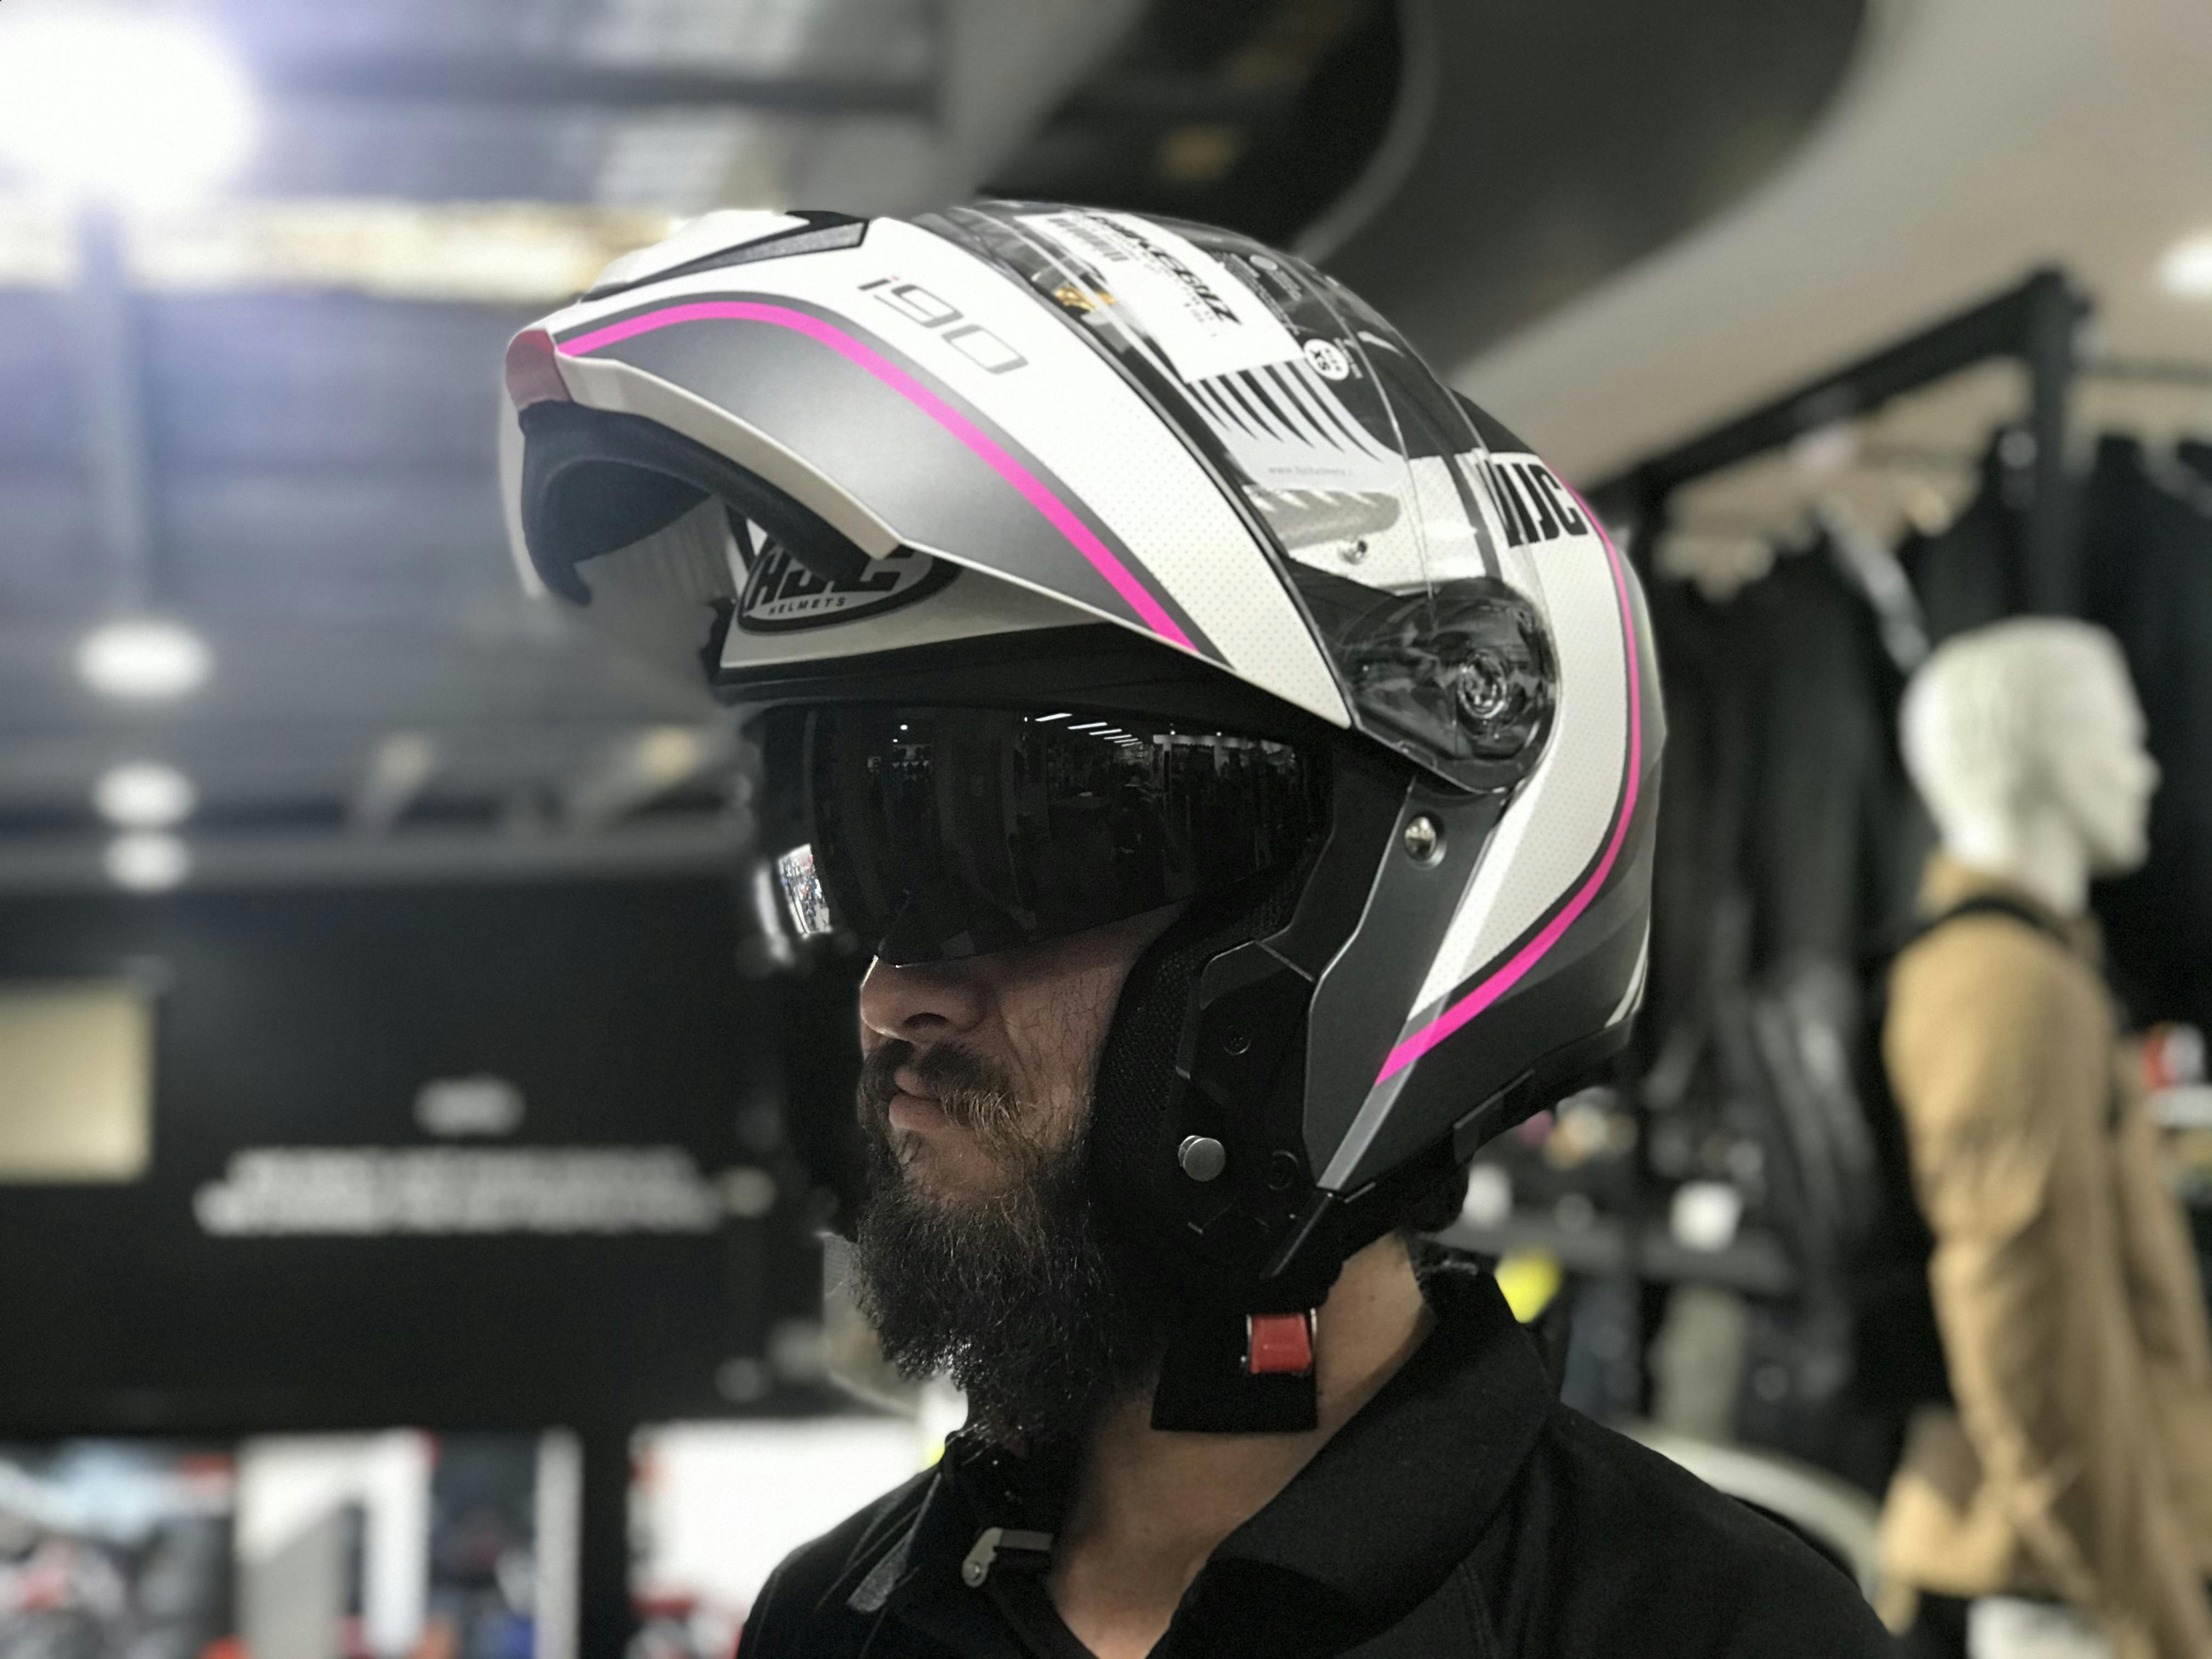 Andrew in a modular helmet white and pink